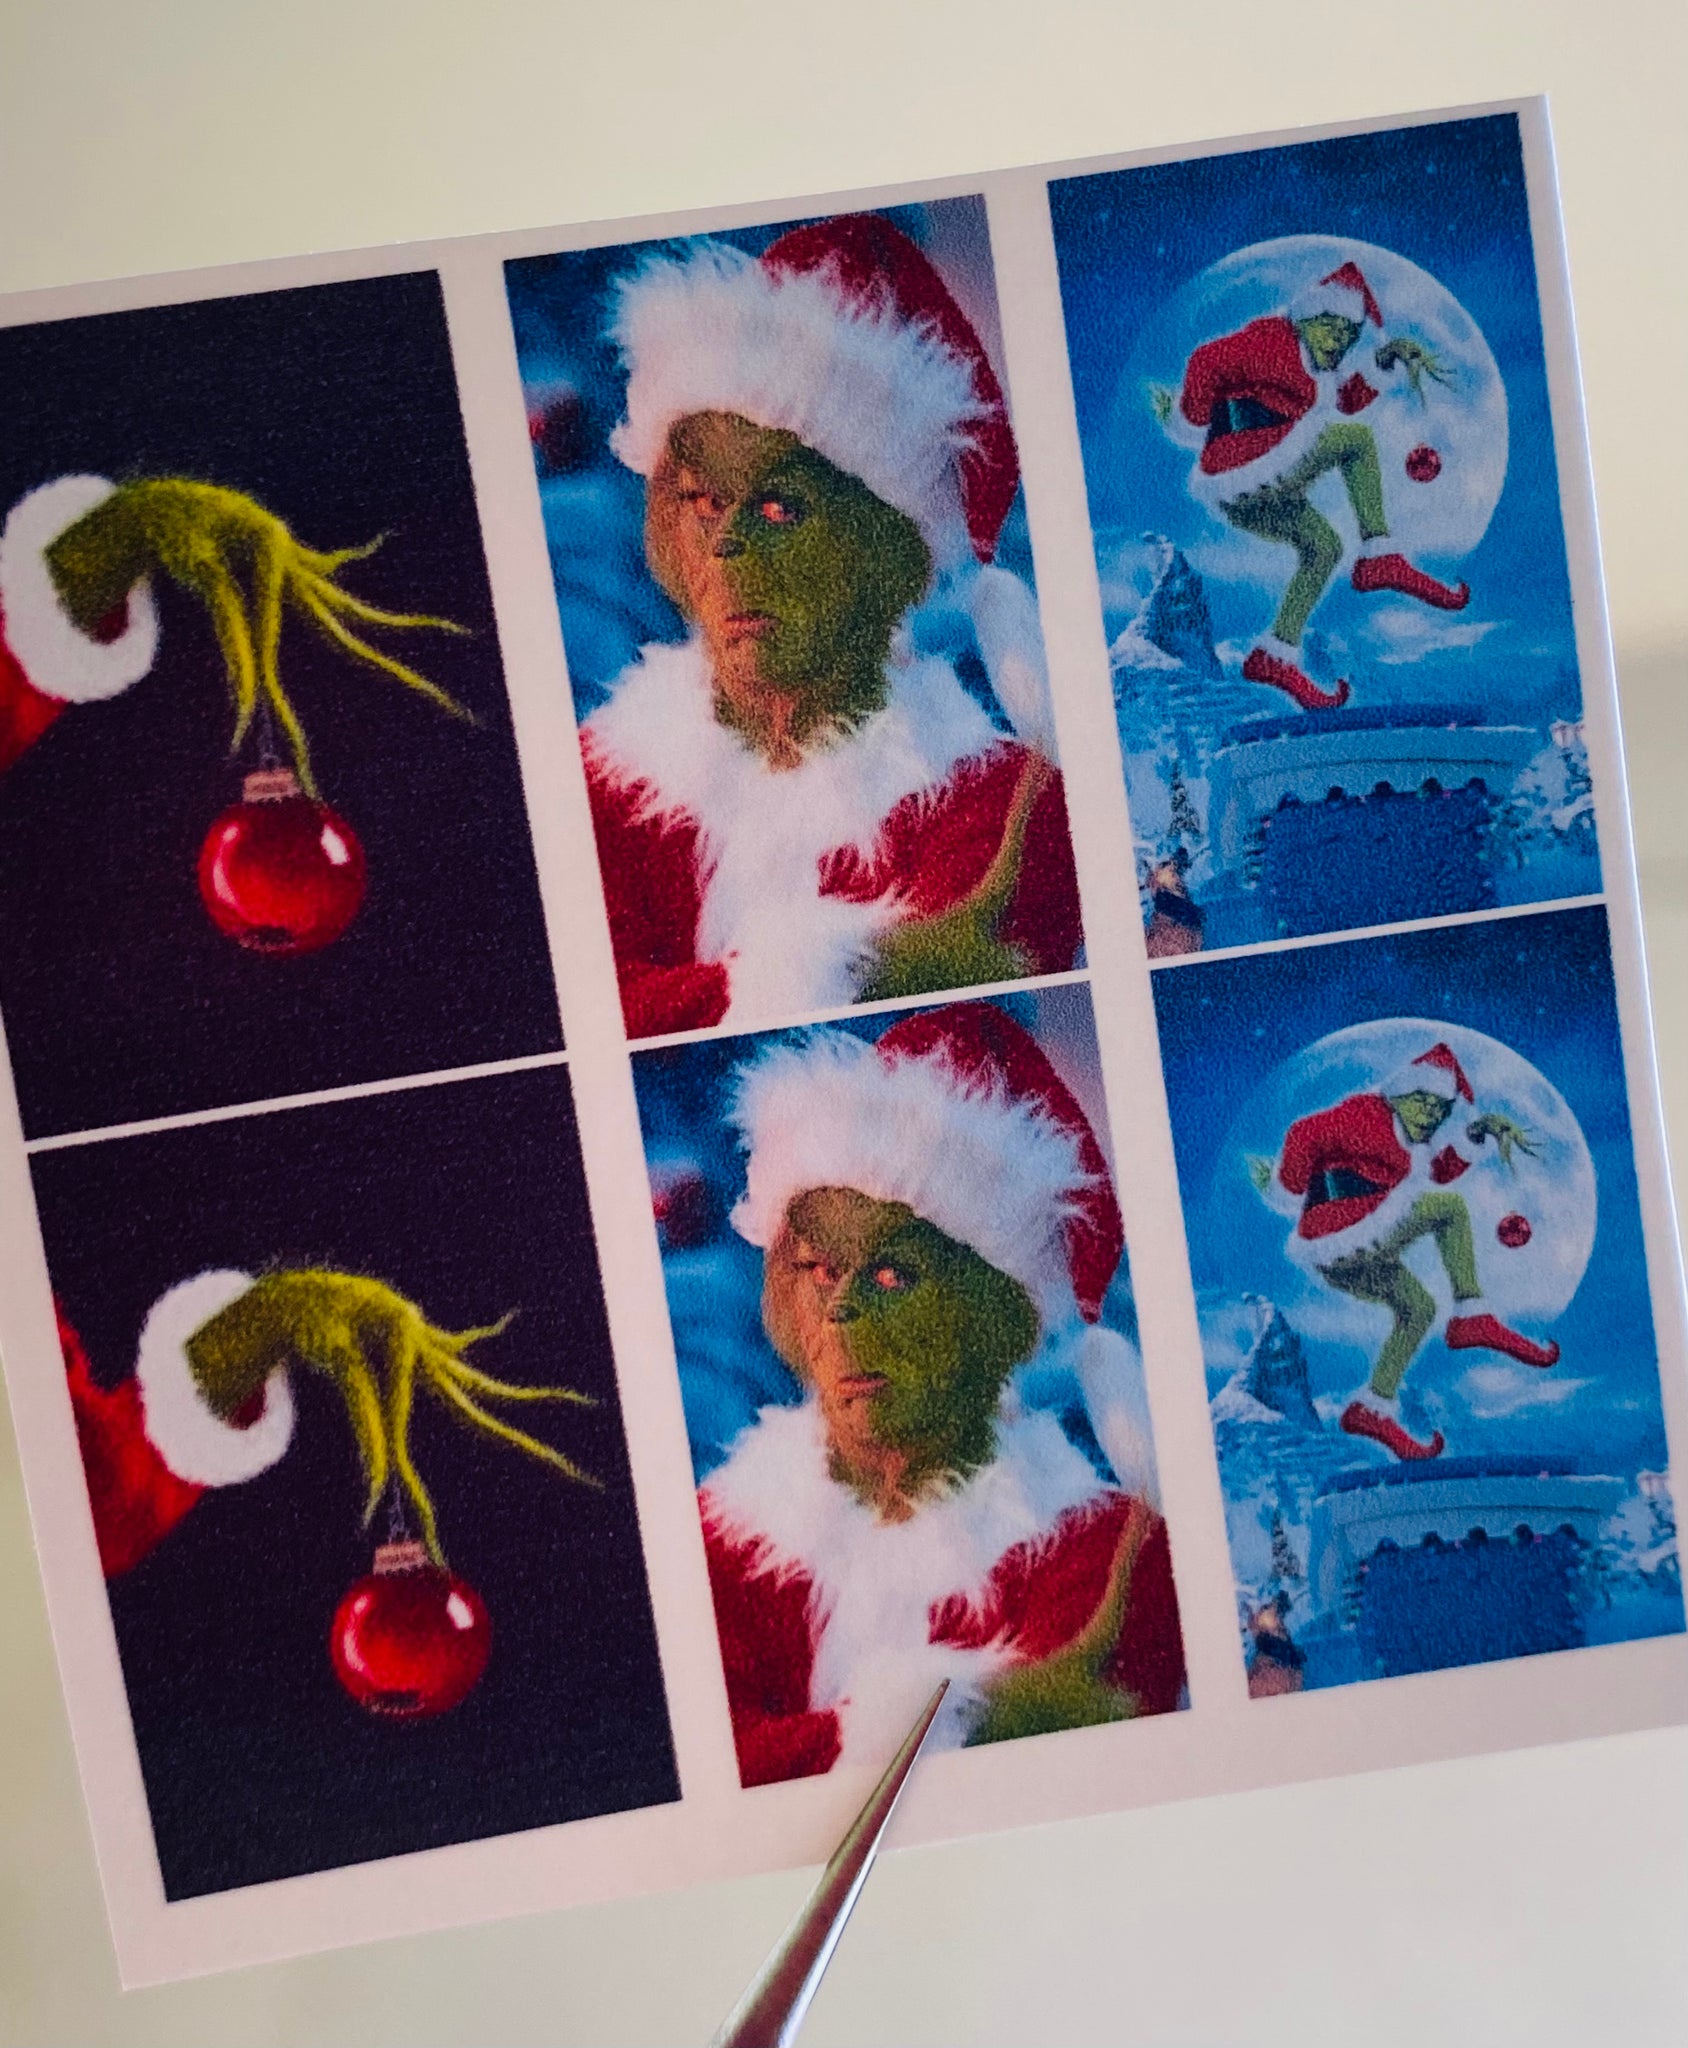 The Grinch -1